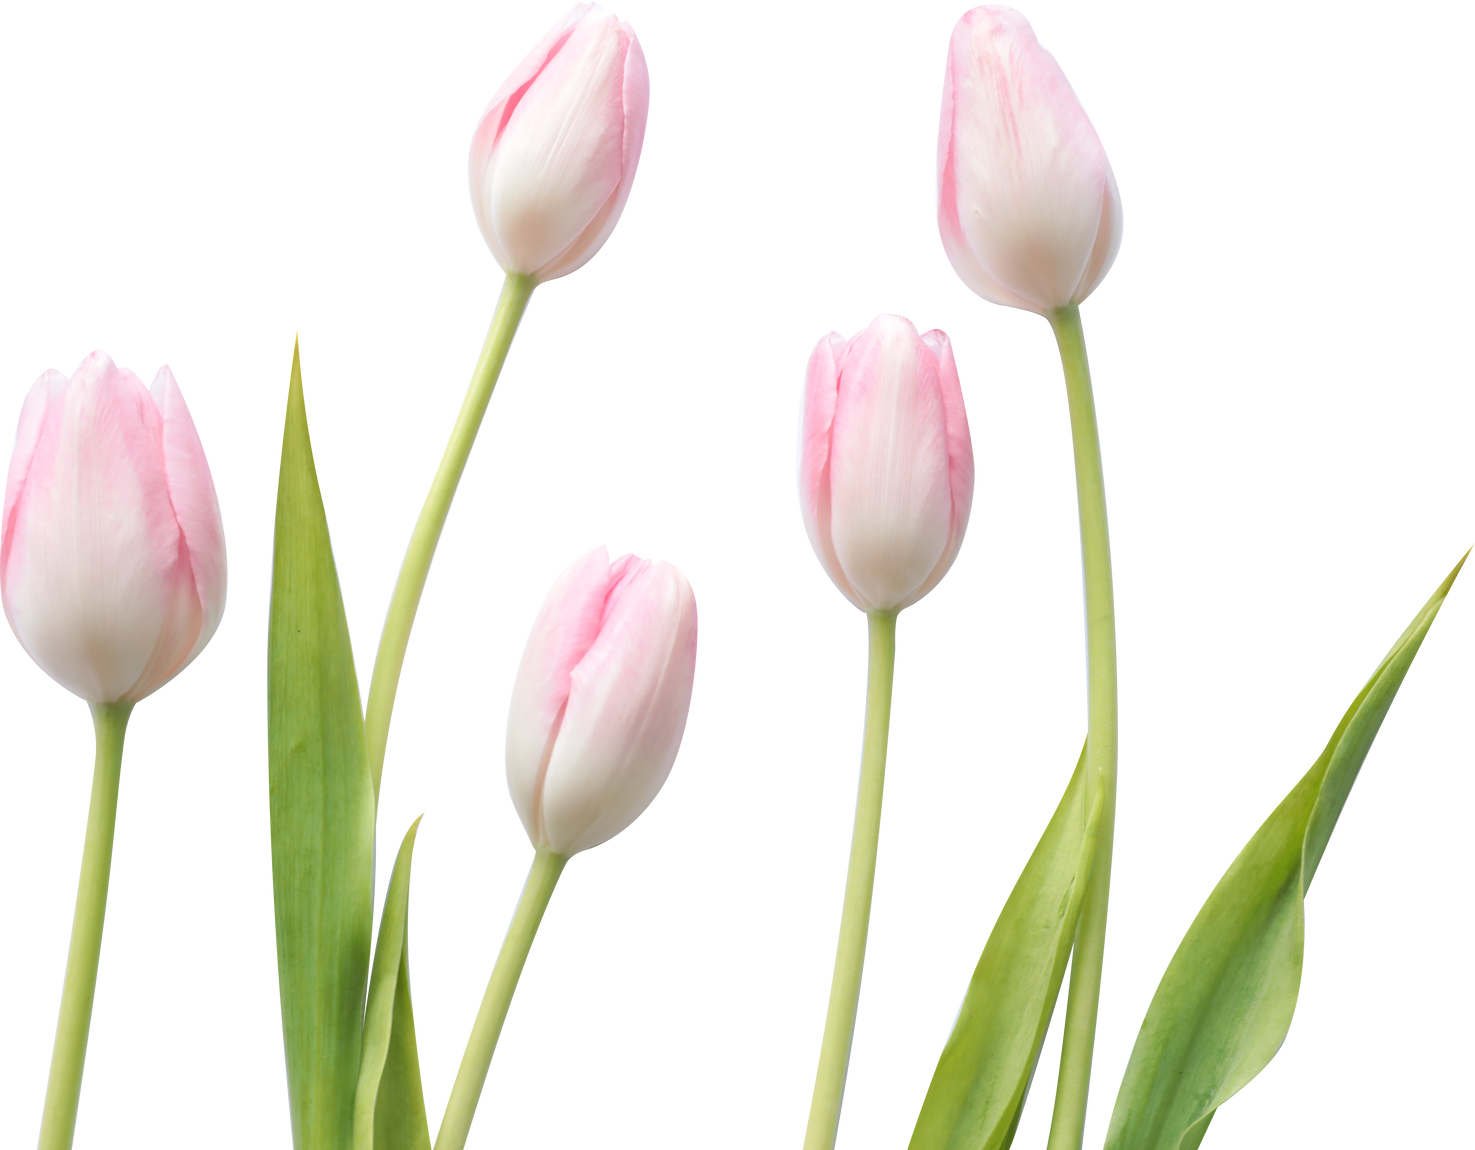 Five Tulips with Stems and Leaves